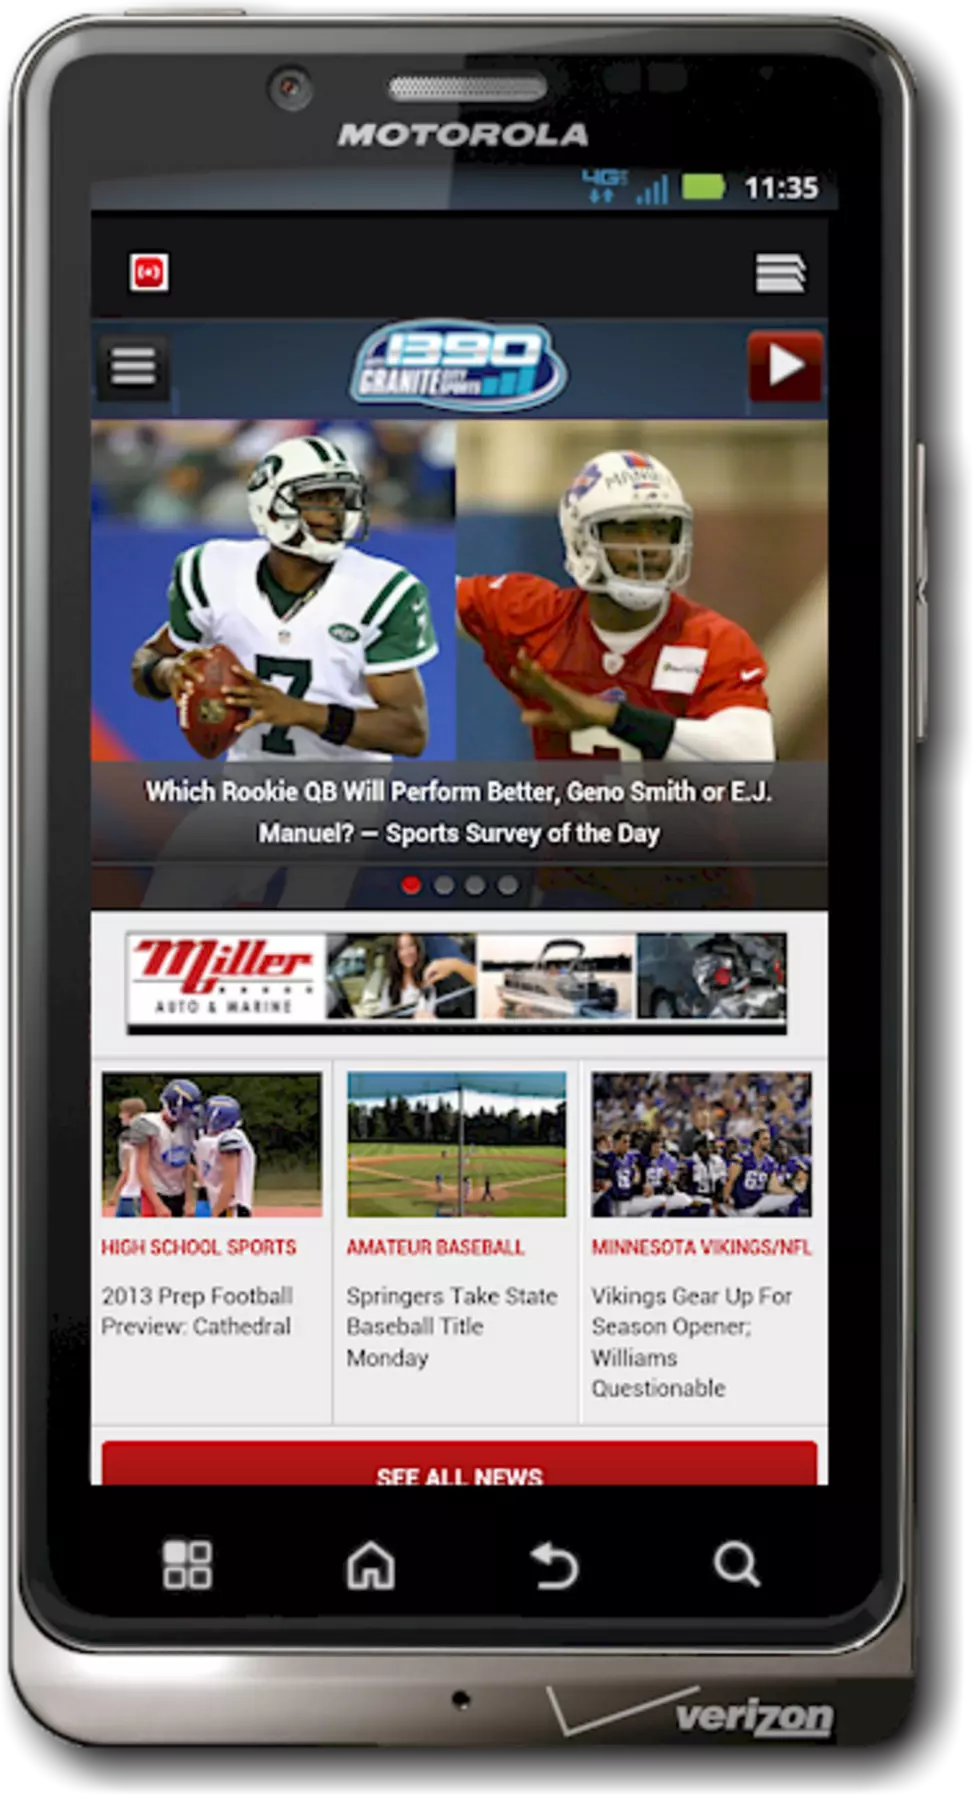 5 Great Reasons to Check Out 1390 Granite City Sports&#8217; New Mobile Site Right Now